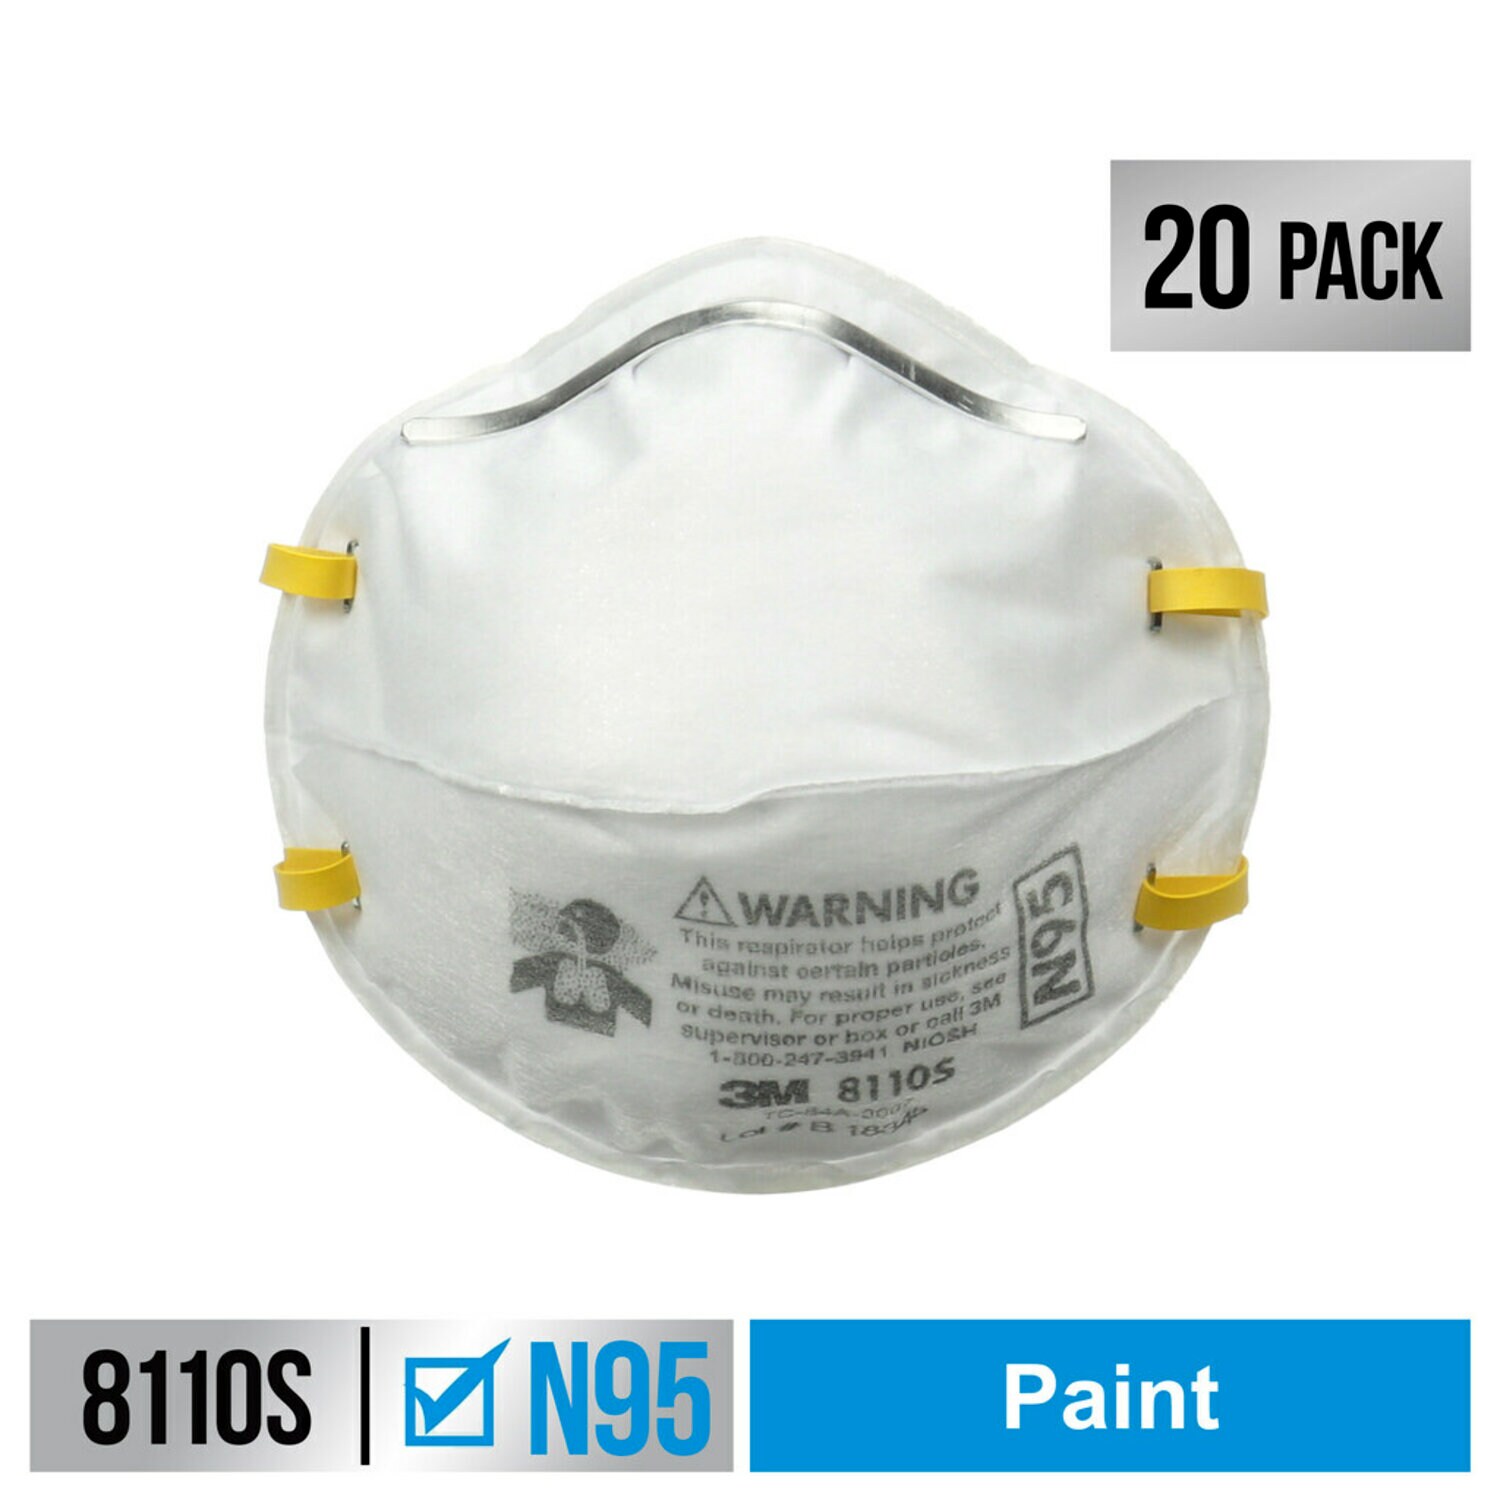 7100159321 - 3M Performance Paint Prep Respirator N95 Particulate, 8110SP20-DC, Size
Small, 20 eaches/pack, 4 packs/case